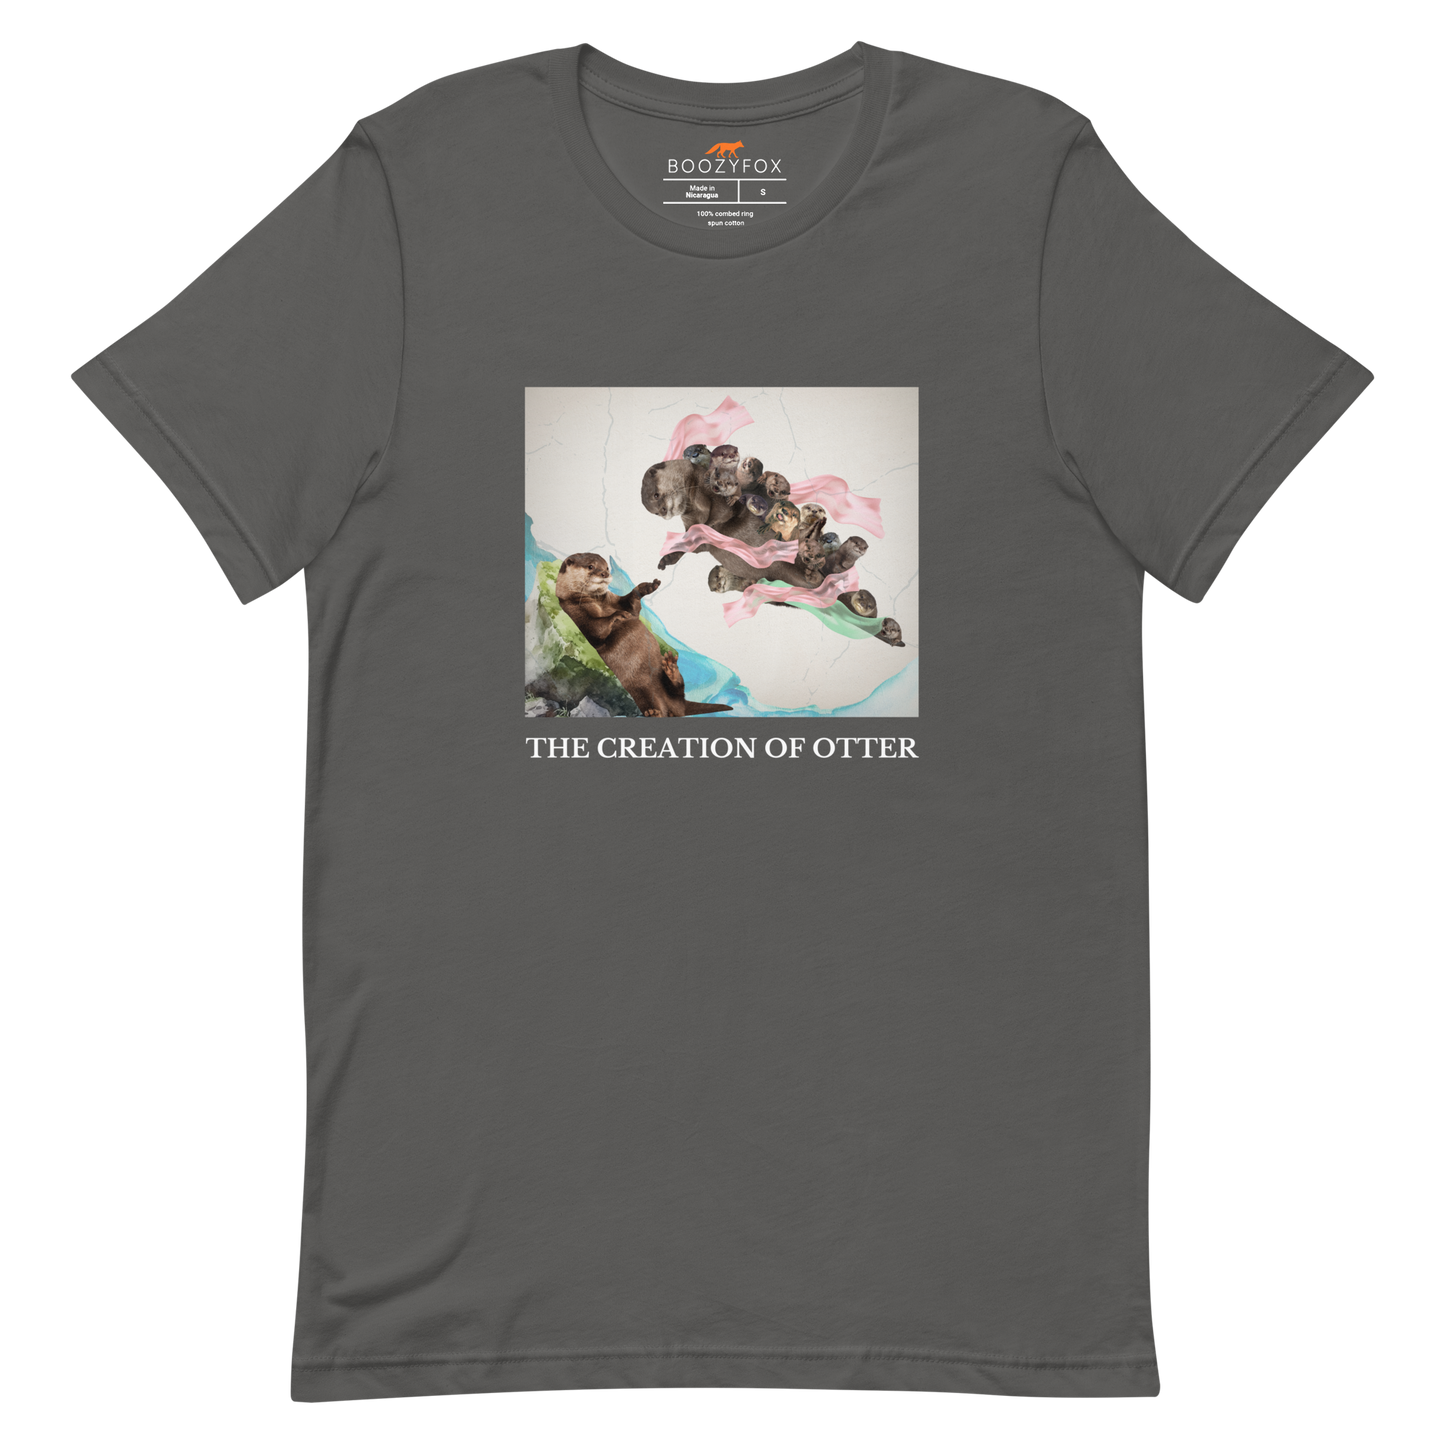 Asphalt Grey Premium Otter Tee featuring a playful The Creation of Otter parody of Michelangelo's masterpiece - Artsy/Funny Graphic Otter Tees - Boozy Fox